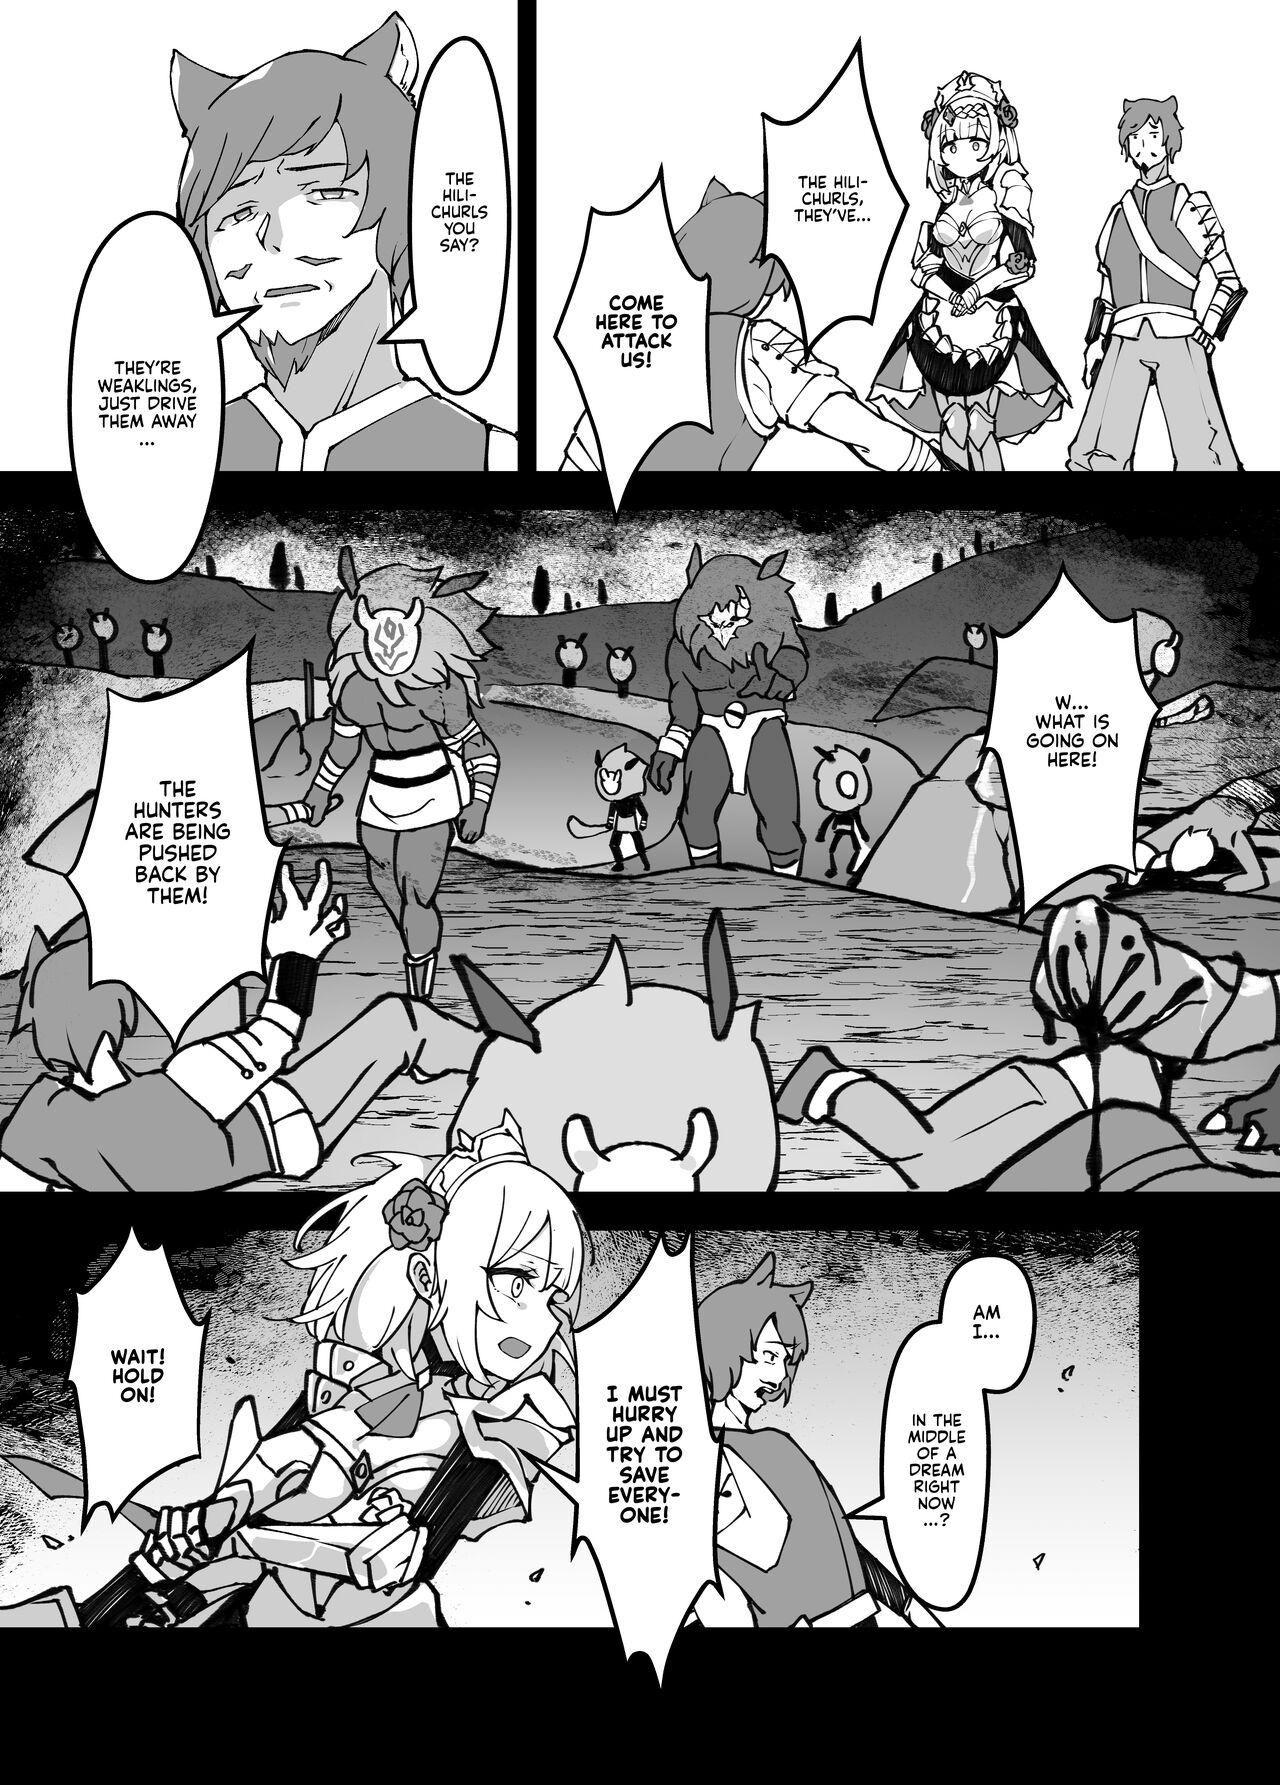 Futa [Karouke (Karou)] The Attack of the Hilichurls II ~The Invasion's Prelude~ Noelle,Chivalric Blossom that withered~ (Genshin Impact) [English] [Kyuume] [Digital] - Genshin impact Perfect Tits - Page 10